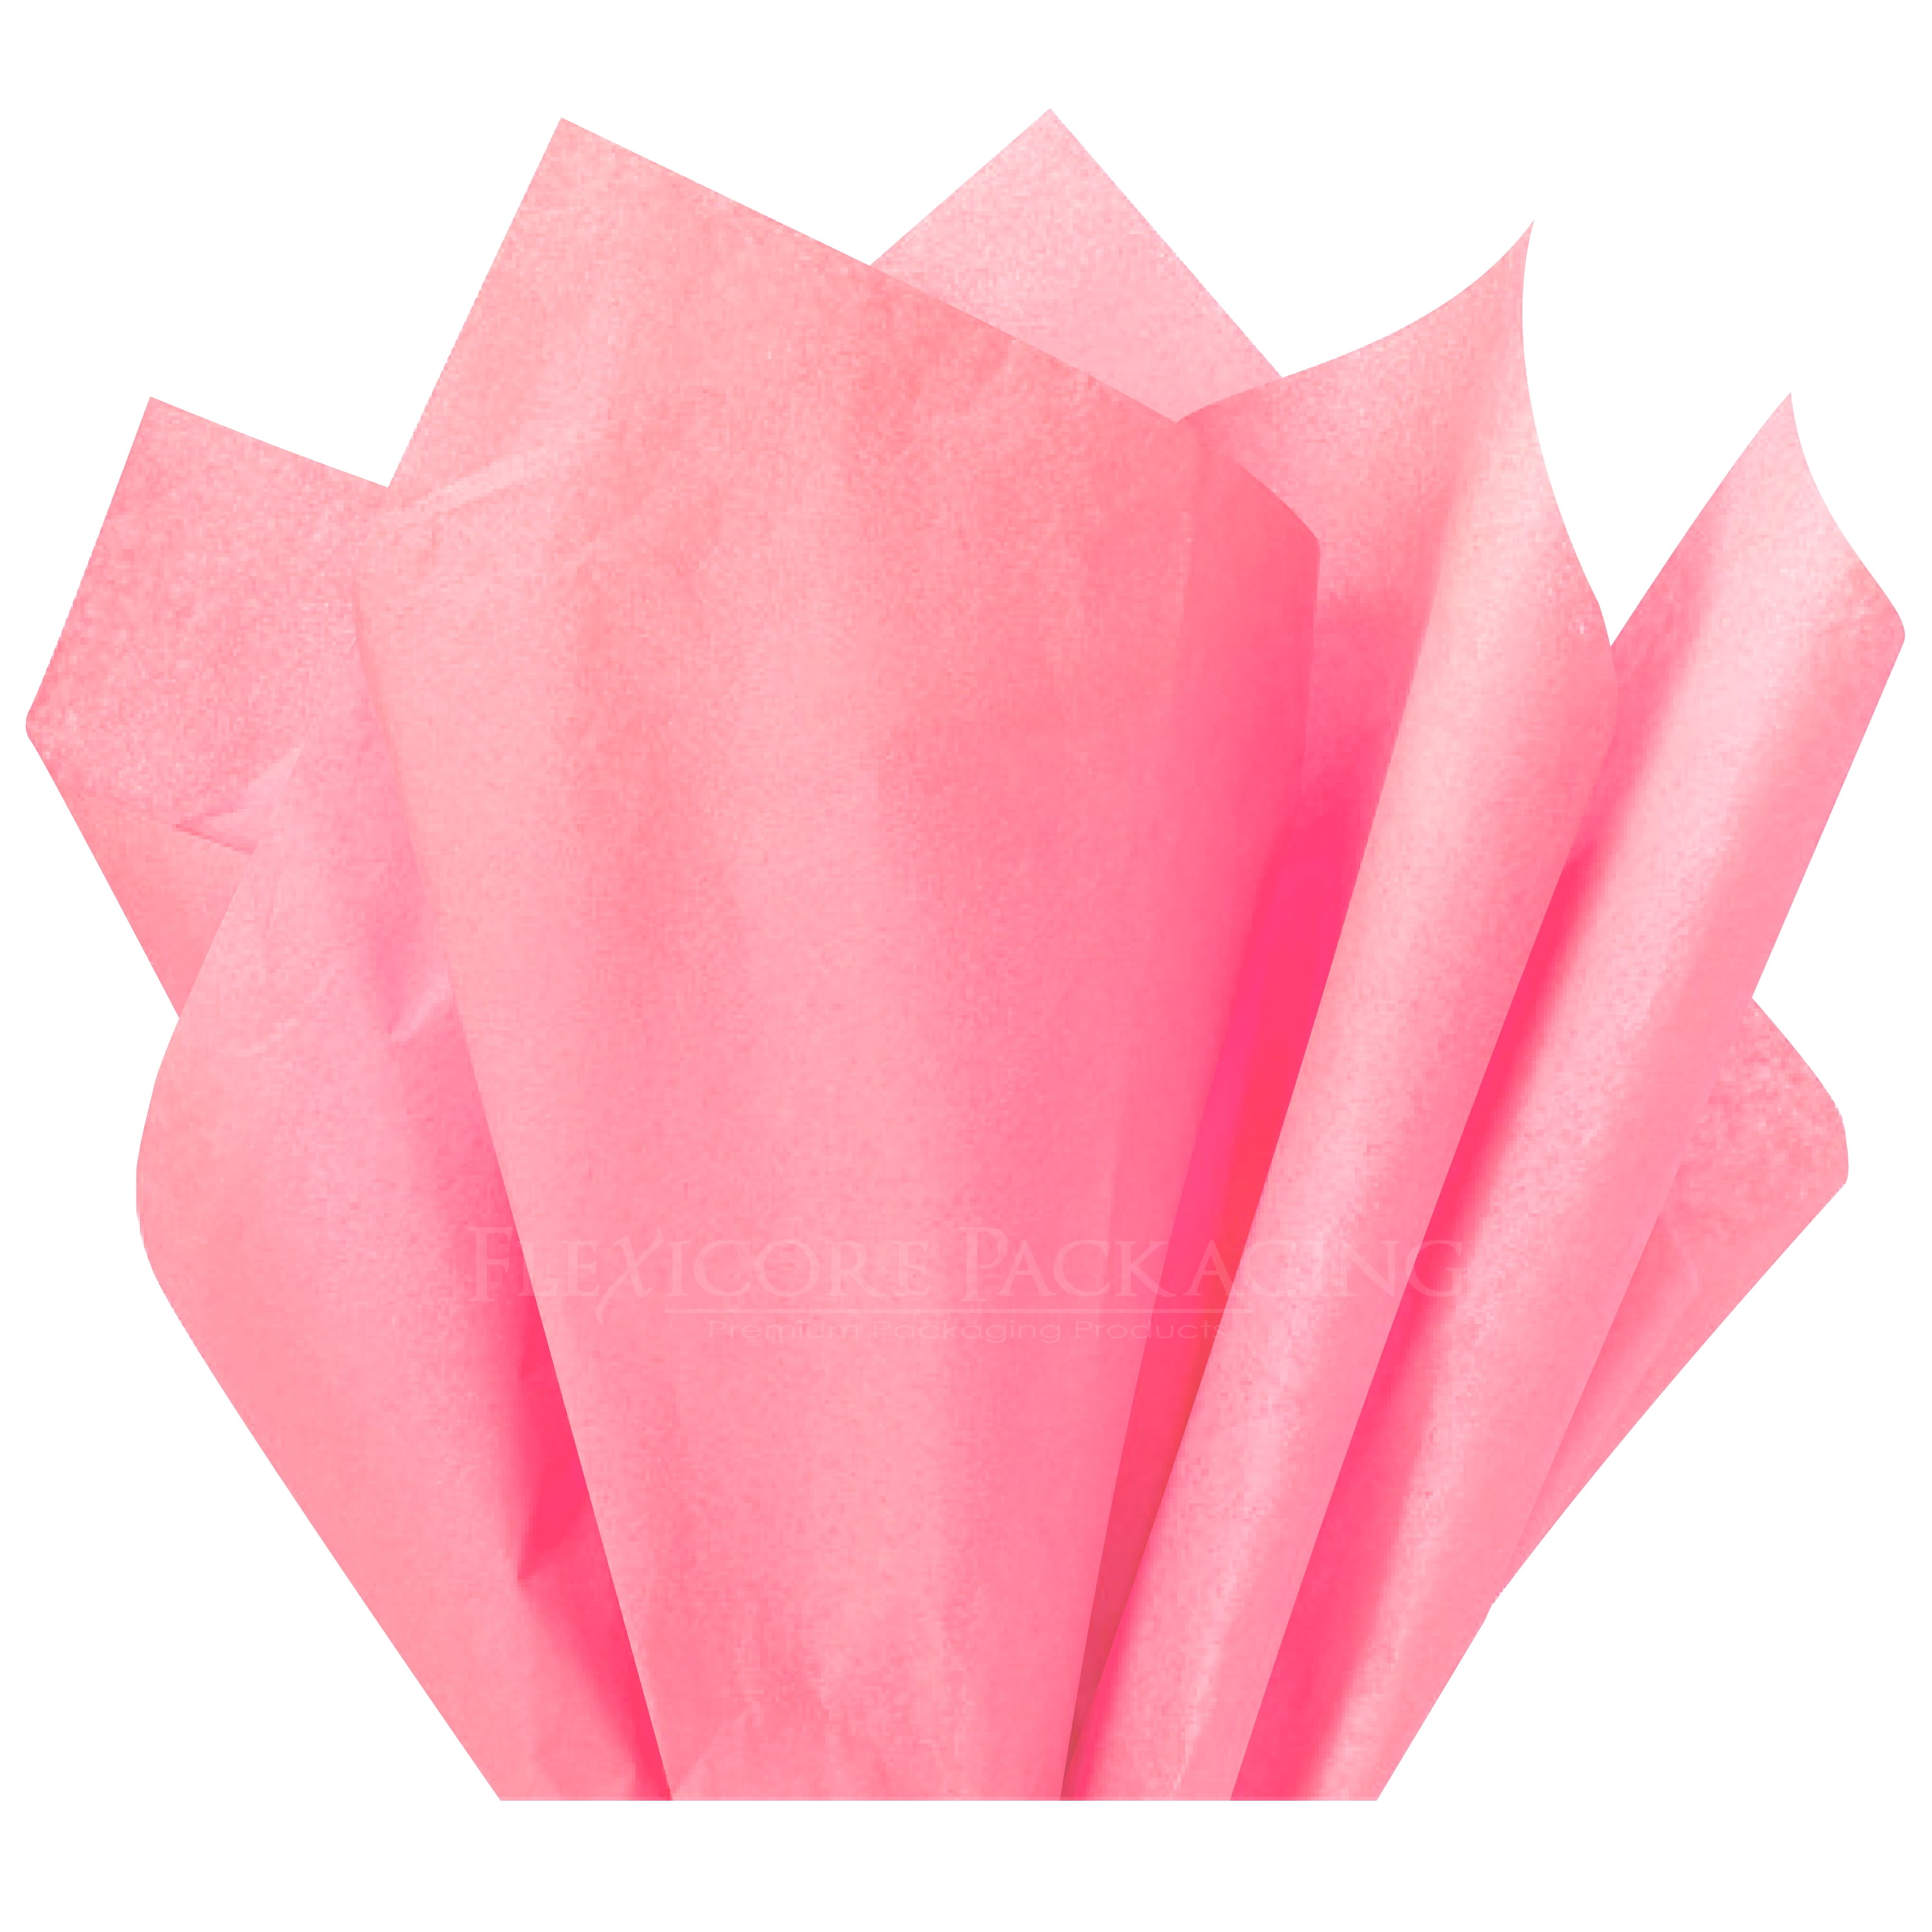 Details about  / Lot of 2 Hallmark Wrap it Up Tissue Pink 8 sheets 19/" x  2.17/' 28.5 Total Sq Ft